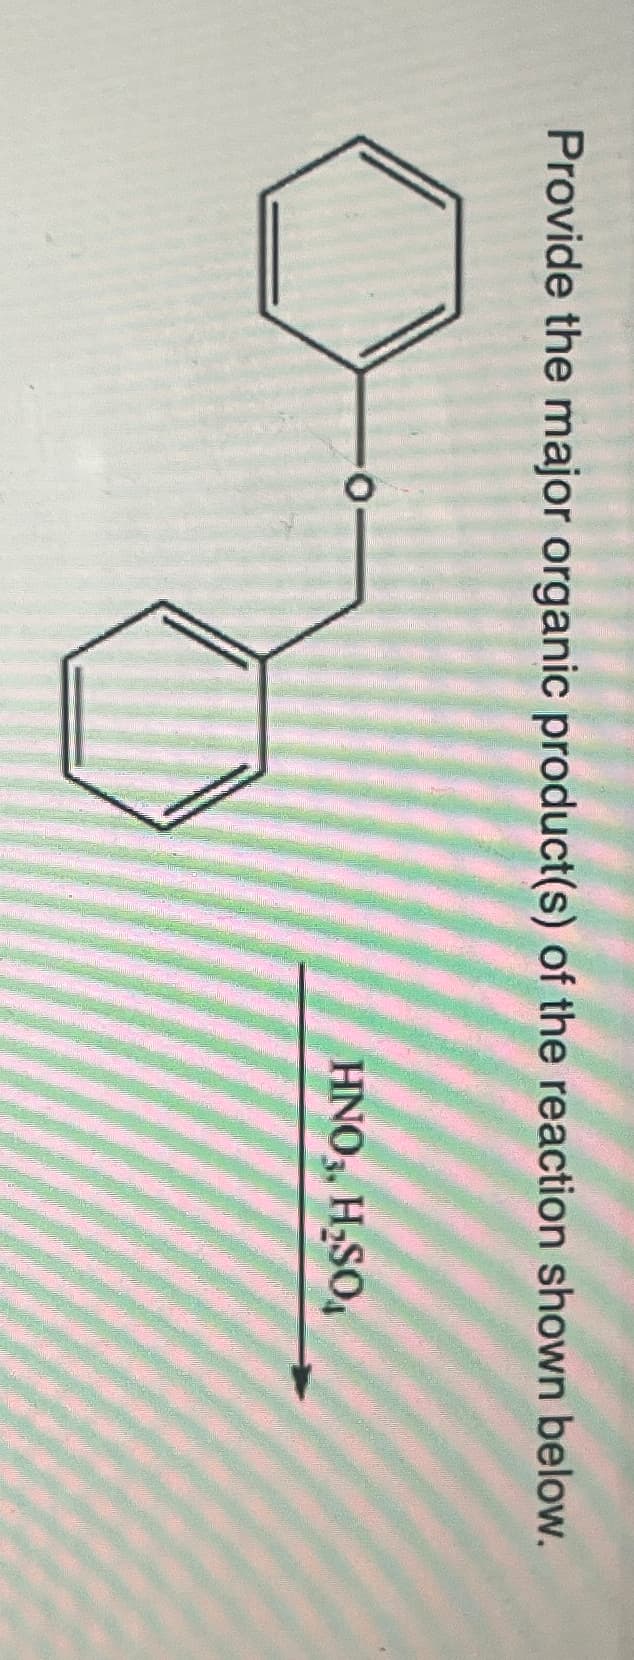 Provide the major organic product(s) of the reaction shown below.
O
HNO3, H₂SO4